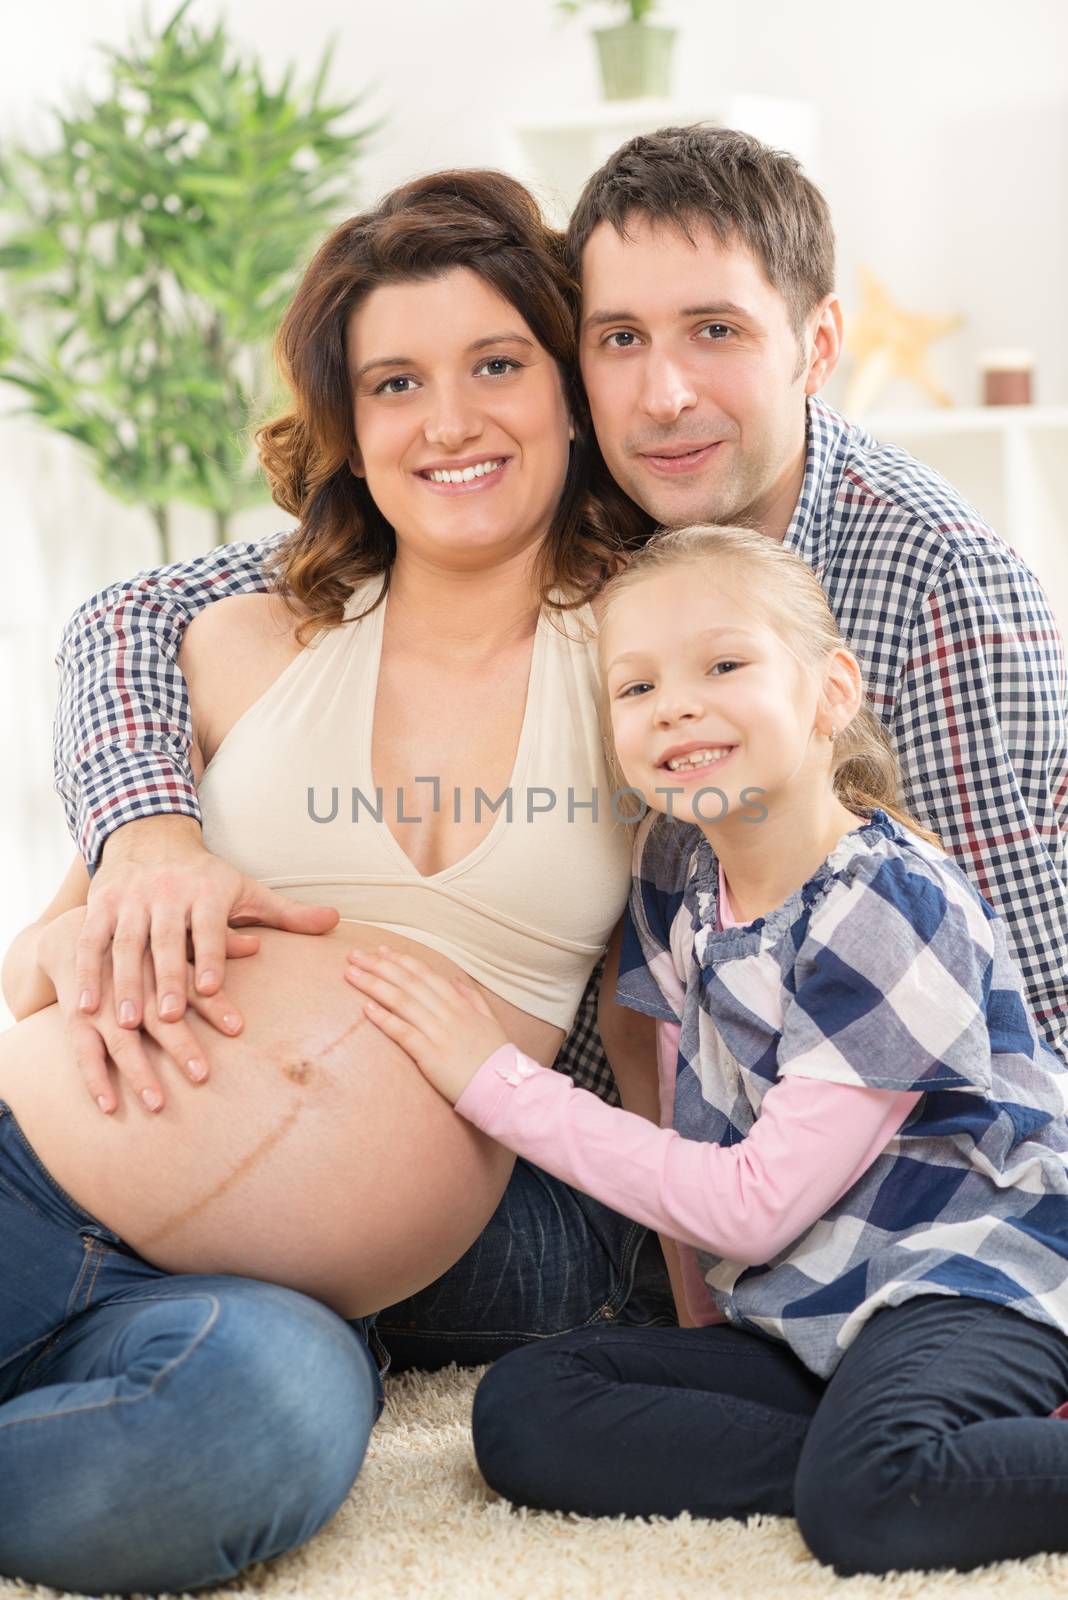 Happy Family Expecting A New Baby by MilanMarkovic78